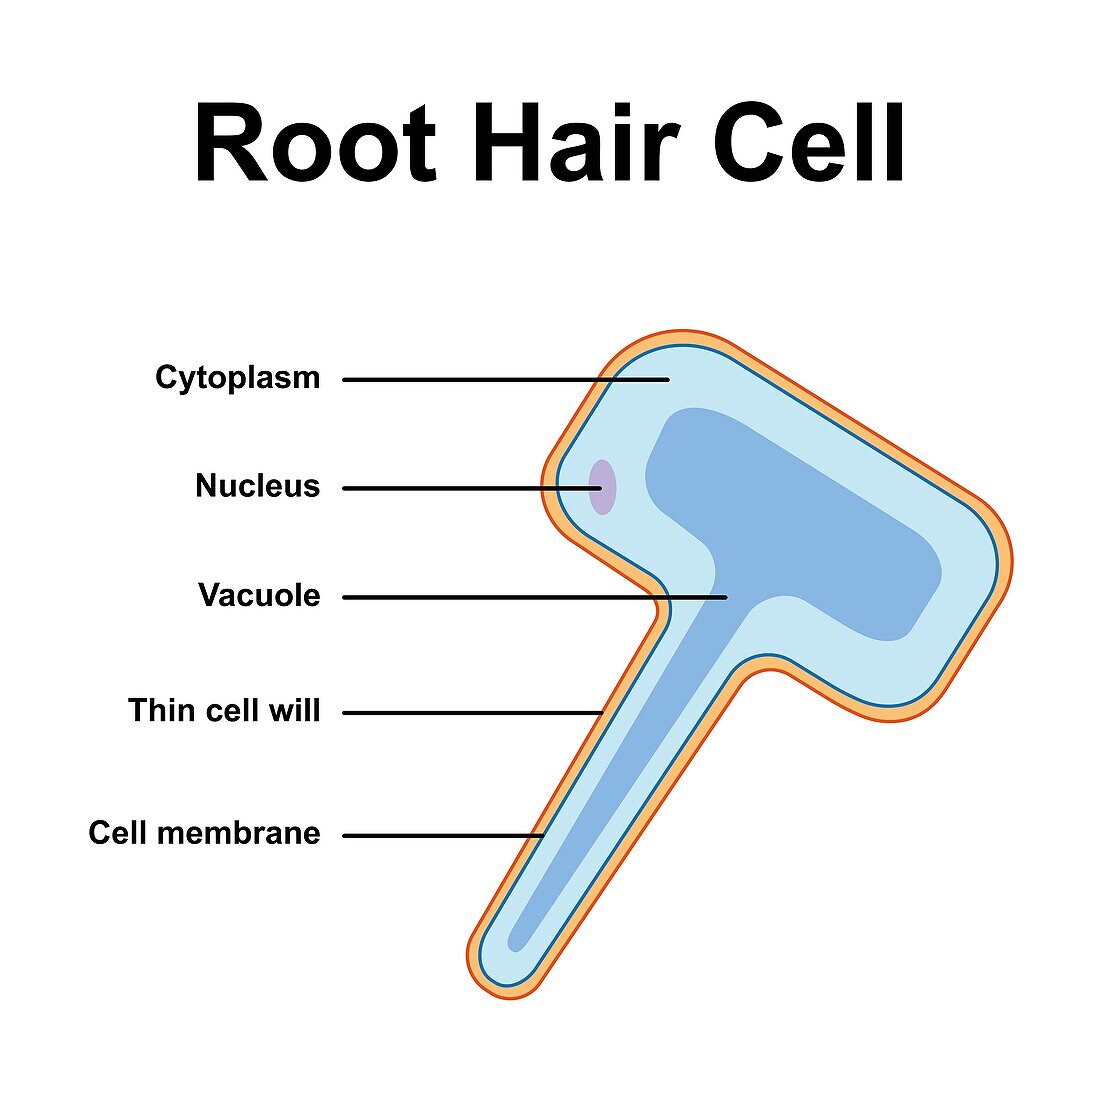 Root hair cell, illustration